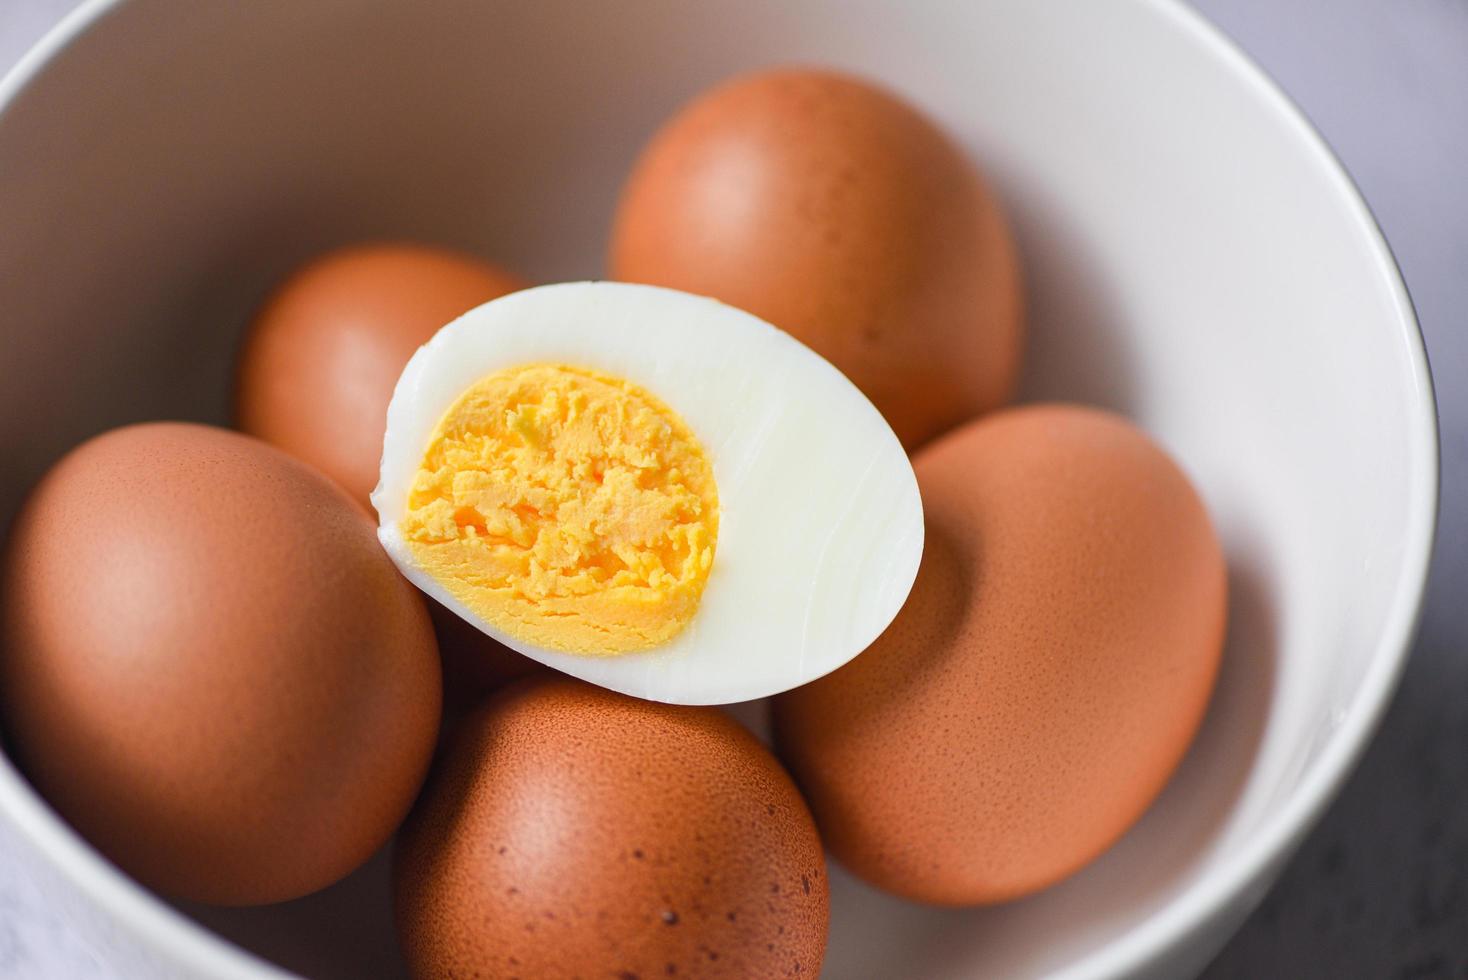 Peeled eggs menu food boiled eggs in a bowl and eggshell, cut in half egg yolks for cooking healthy eating photo